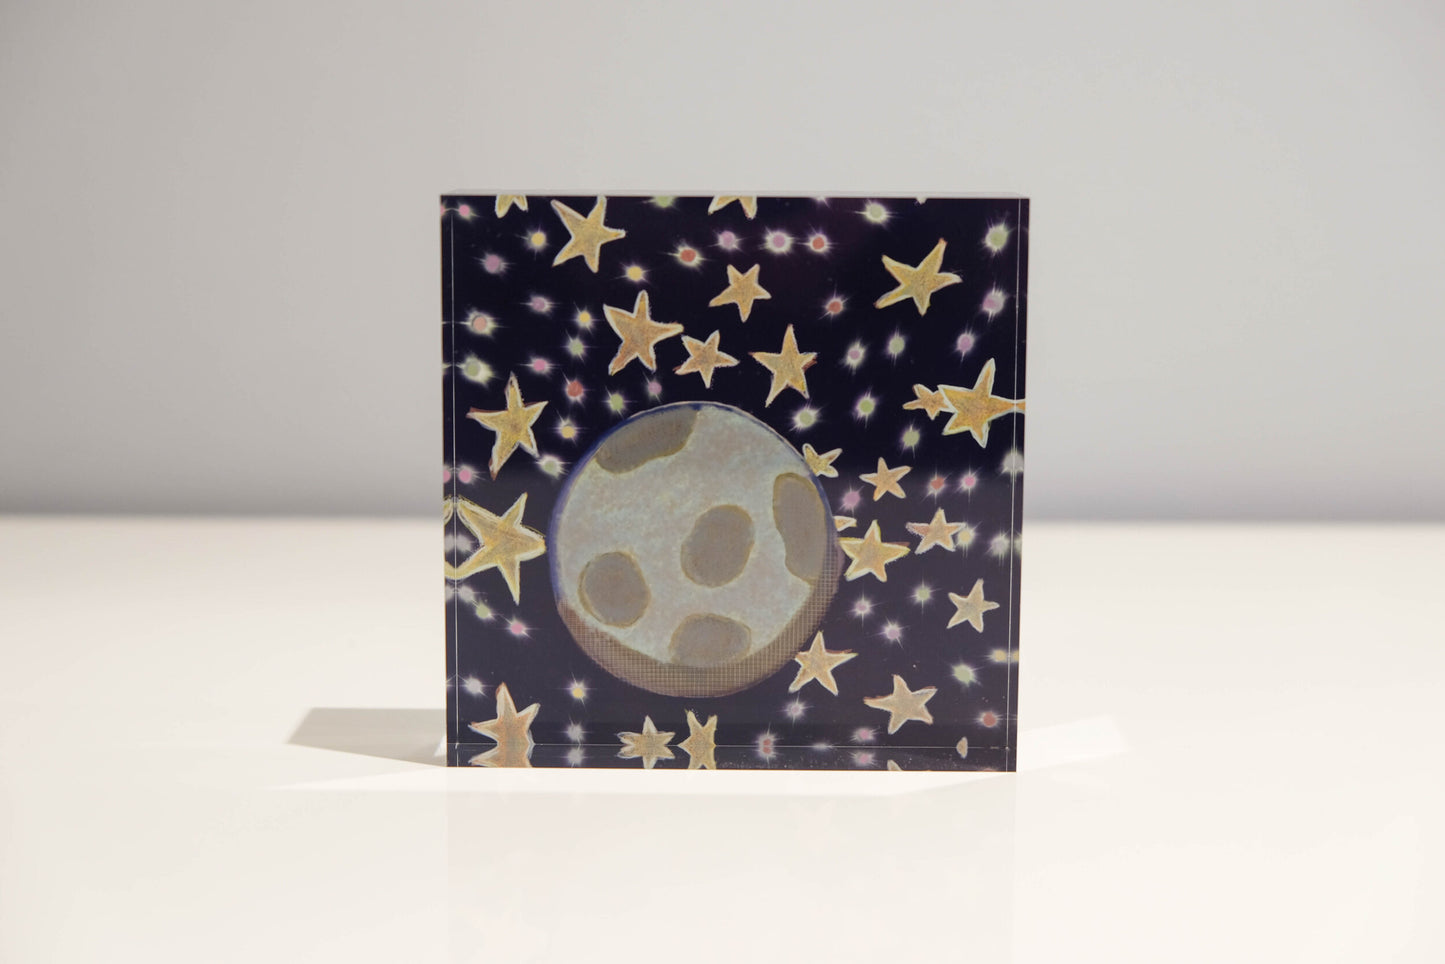 Front view of Acrylic block depicting outer space with a blue background and golden stars with Earth in the center